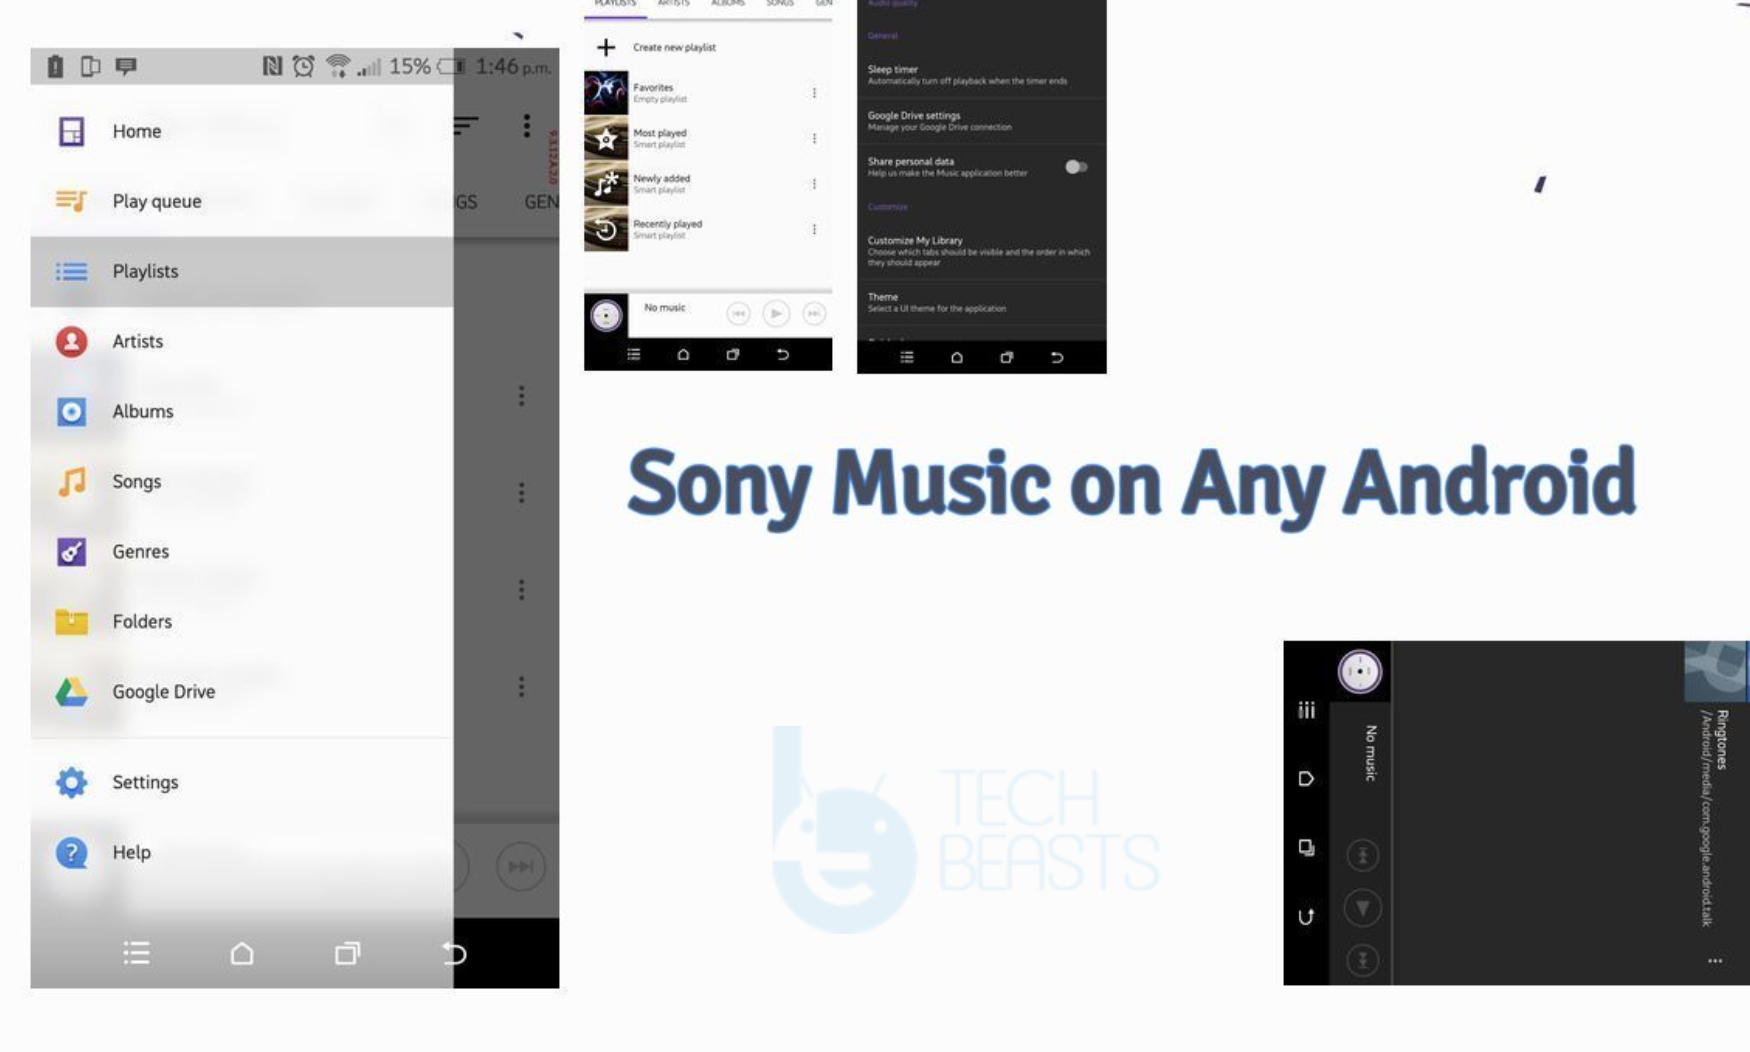 Sony Music on Android